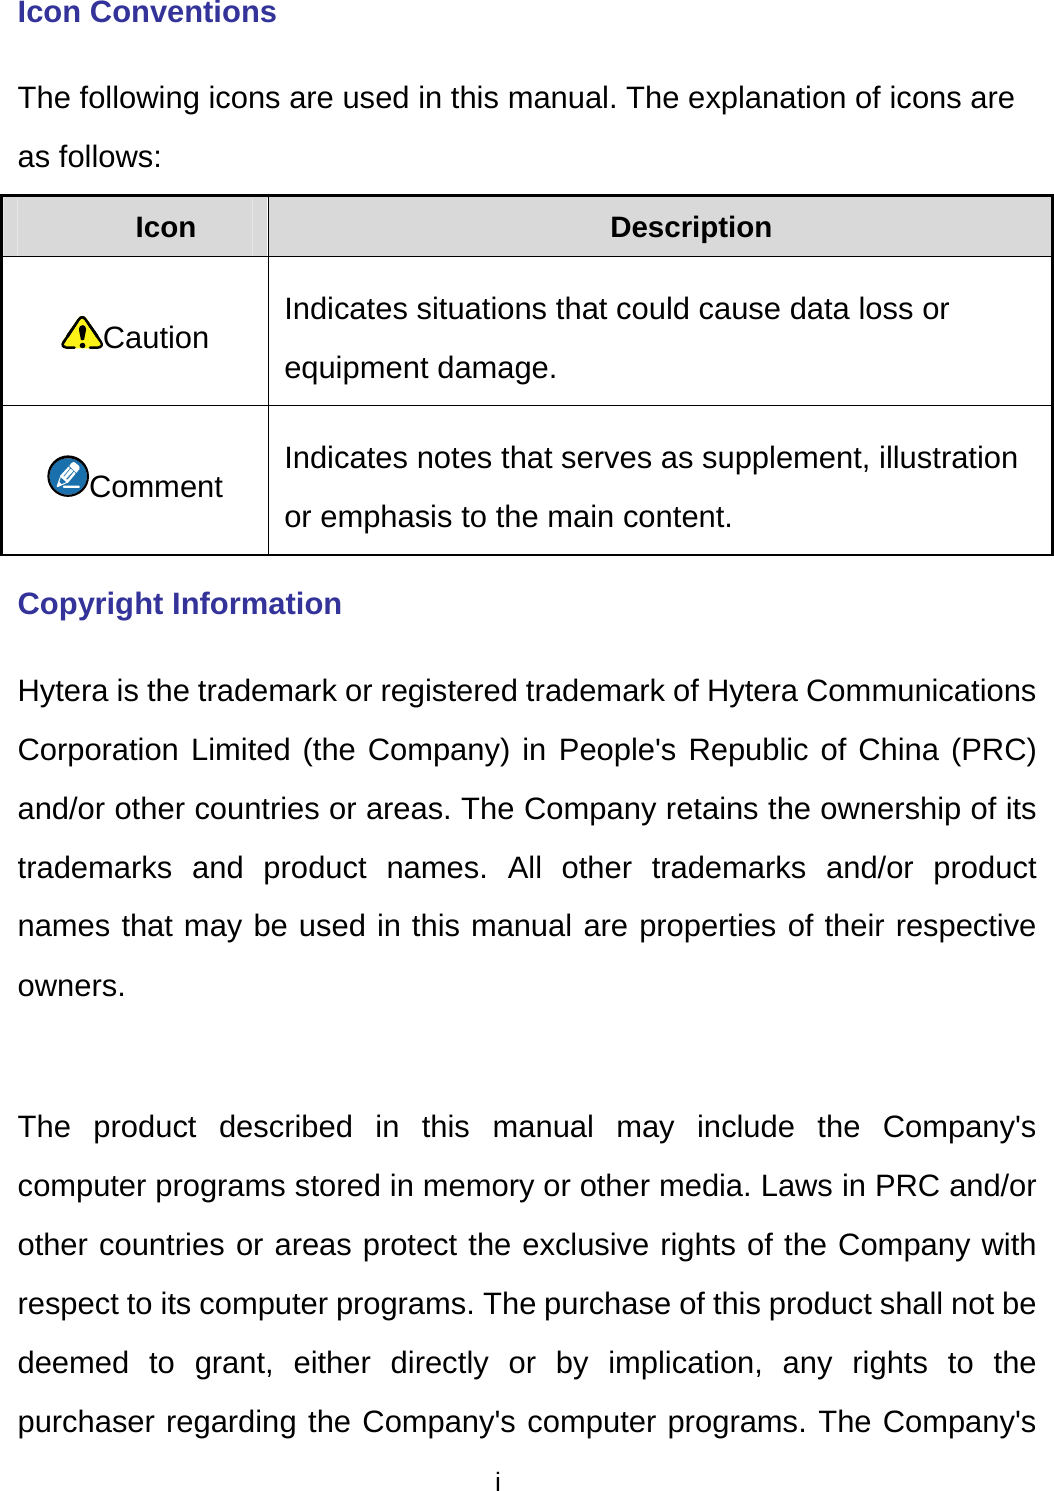  i Icon Conventions The following icons are used in this manual. The explanation of icons are as follows: Icon  Description Caution Indicates situations that could cause data loss or equipment damage. Comment Indicates notes that serves as supplement, illustration or emphasis to the main content. Copyright Information Hytera is the trademark or registered trademark of Hytera Communications Corporation Limited (the Company) in People&apos;s Republic of China (PRC) and/or other countries or areas. The Company retains the ownership of its trademarks and product names. All other trademarks and/or product names that may be used in this manual are properties of their respective owners.   The product described in this manual may include the Company&apos;s computer programs stored in memory or other media. Laws in PRC and/or other countries or areas protect the exclusive rights of the Company with respect to its computer programs. The purchase of this product shall not be deemed to grant, either directly or by implication, any rights to the purchaser regarding the Company&apos;s computer programs. The Company&apos;s 